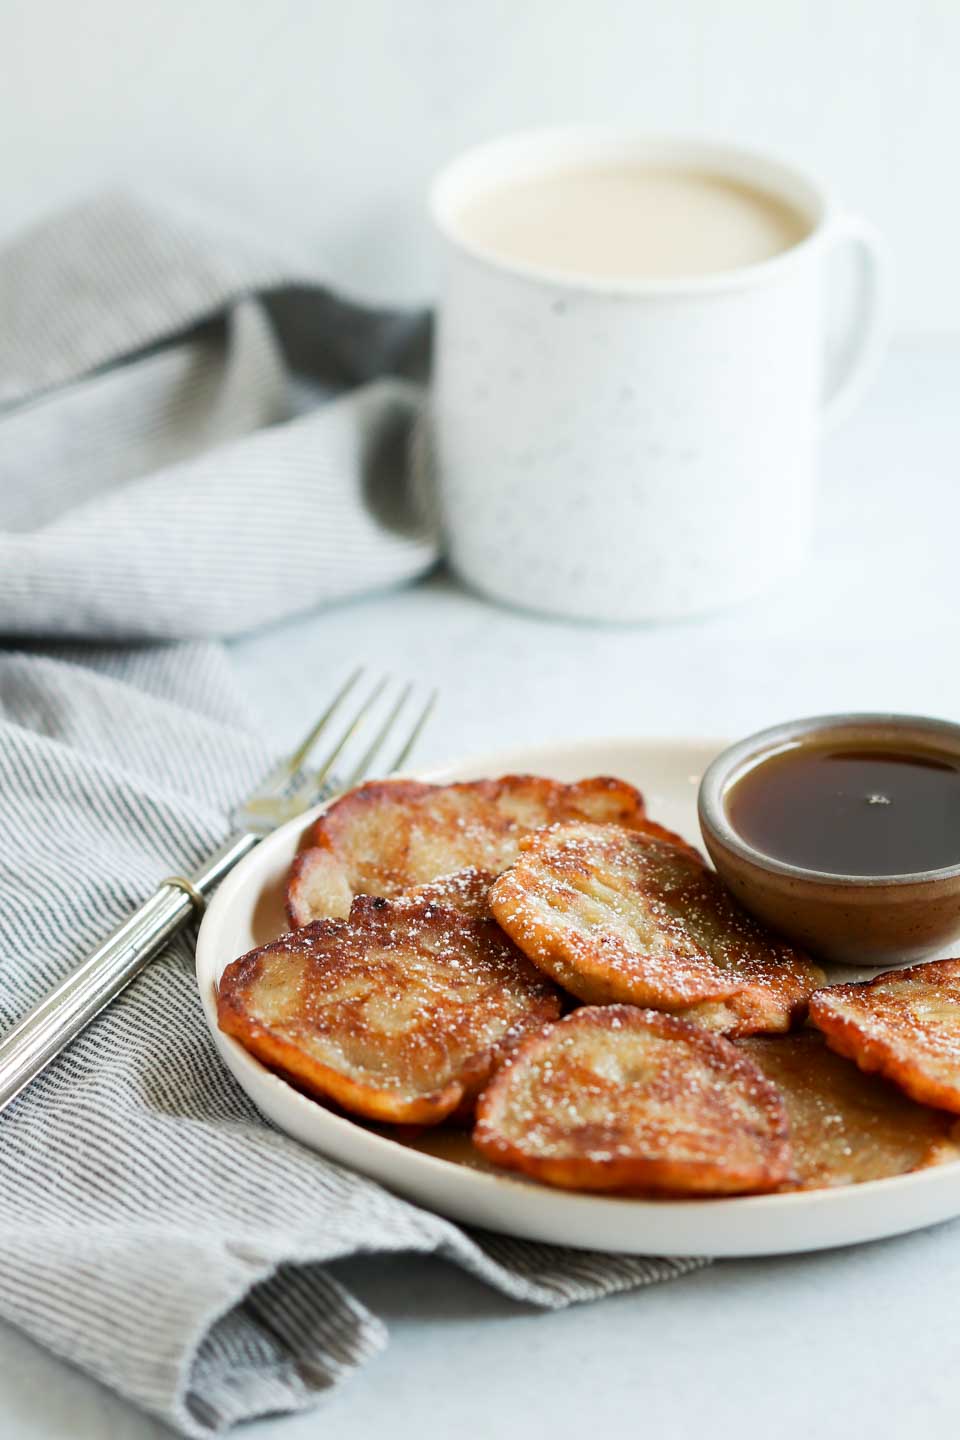 Jamaican banana fritters served on a plate with a small dish of maple syrup on the side. The fritters are golden brown and look crispy on the outside.